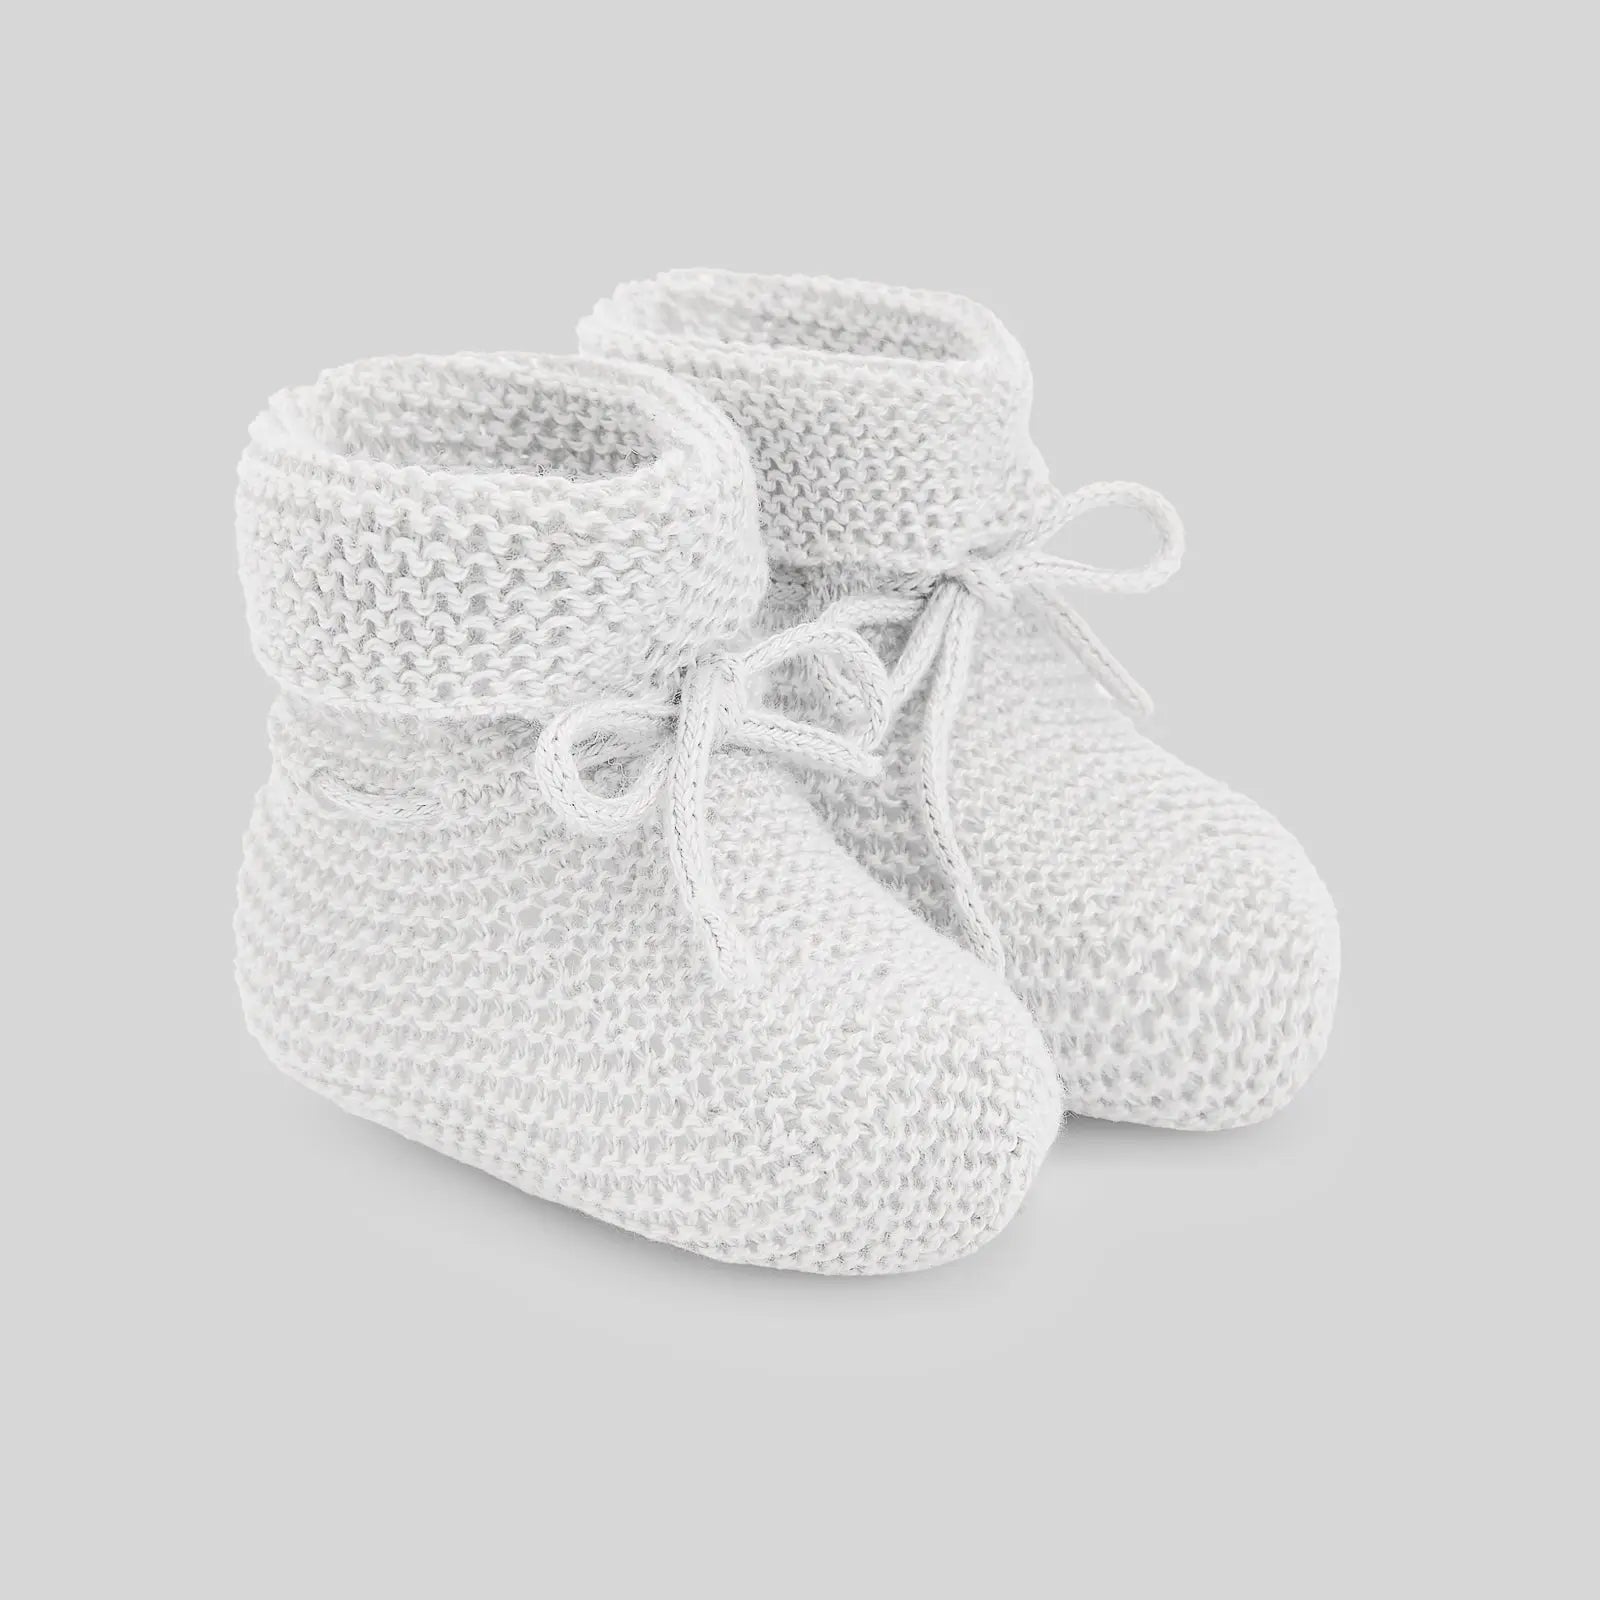 Blue Almonds Ltd Boy's & Girl's Knitted Booties in White Paz Rodriguez